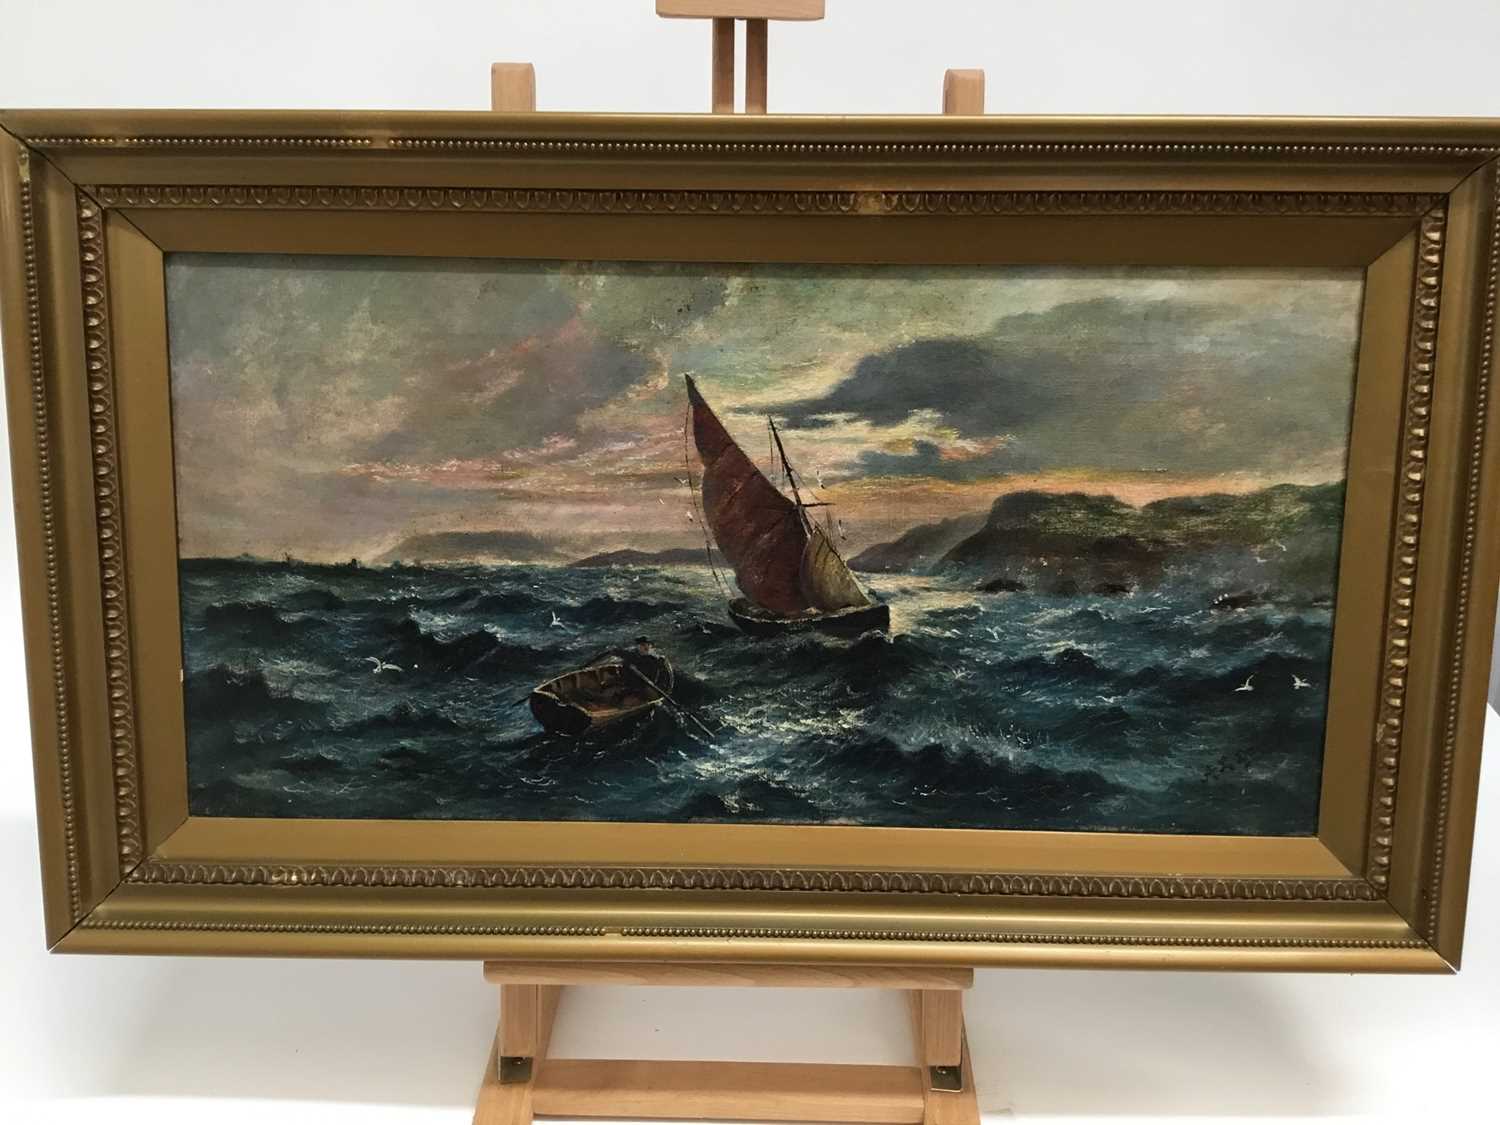 Lot 77 - A.L. Dogley, late 19th century, oil on canvas, Coastal scene with a dinghy and yacht off rocks, signed, in gilt frame, 30cm x 60cm